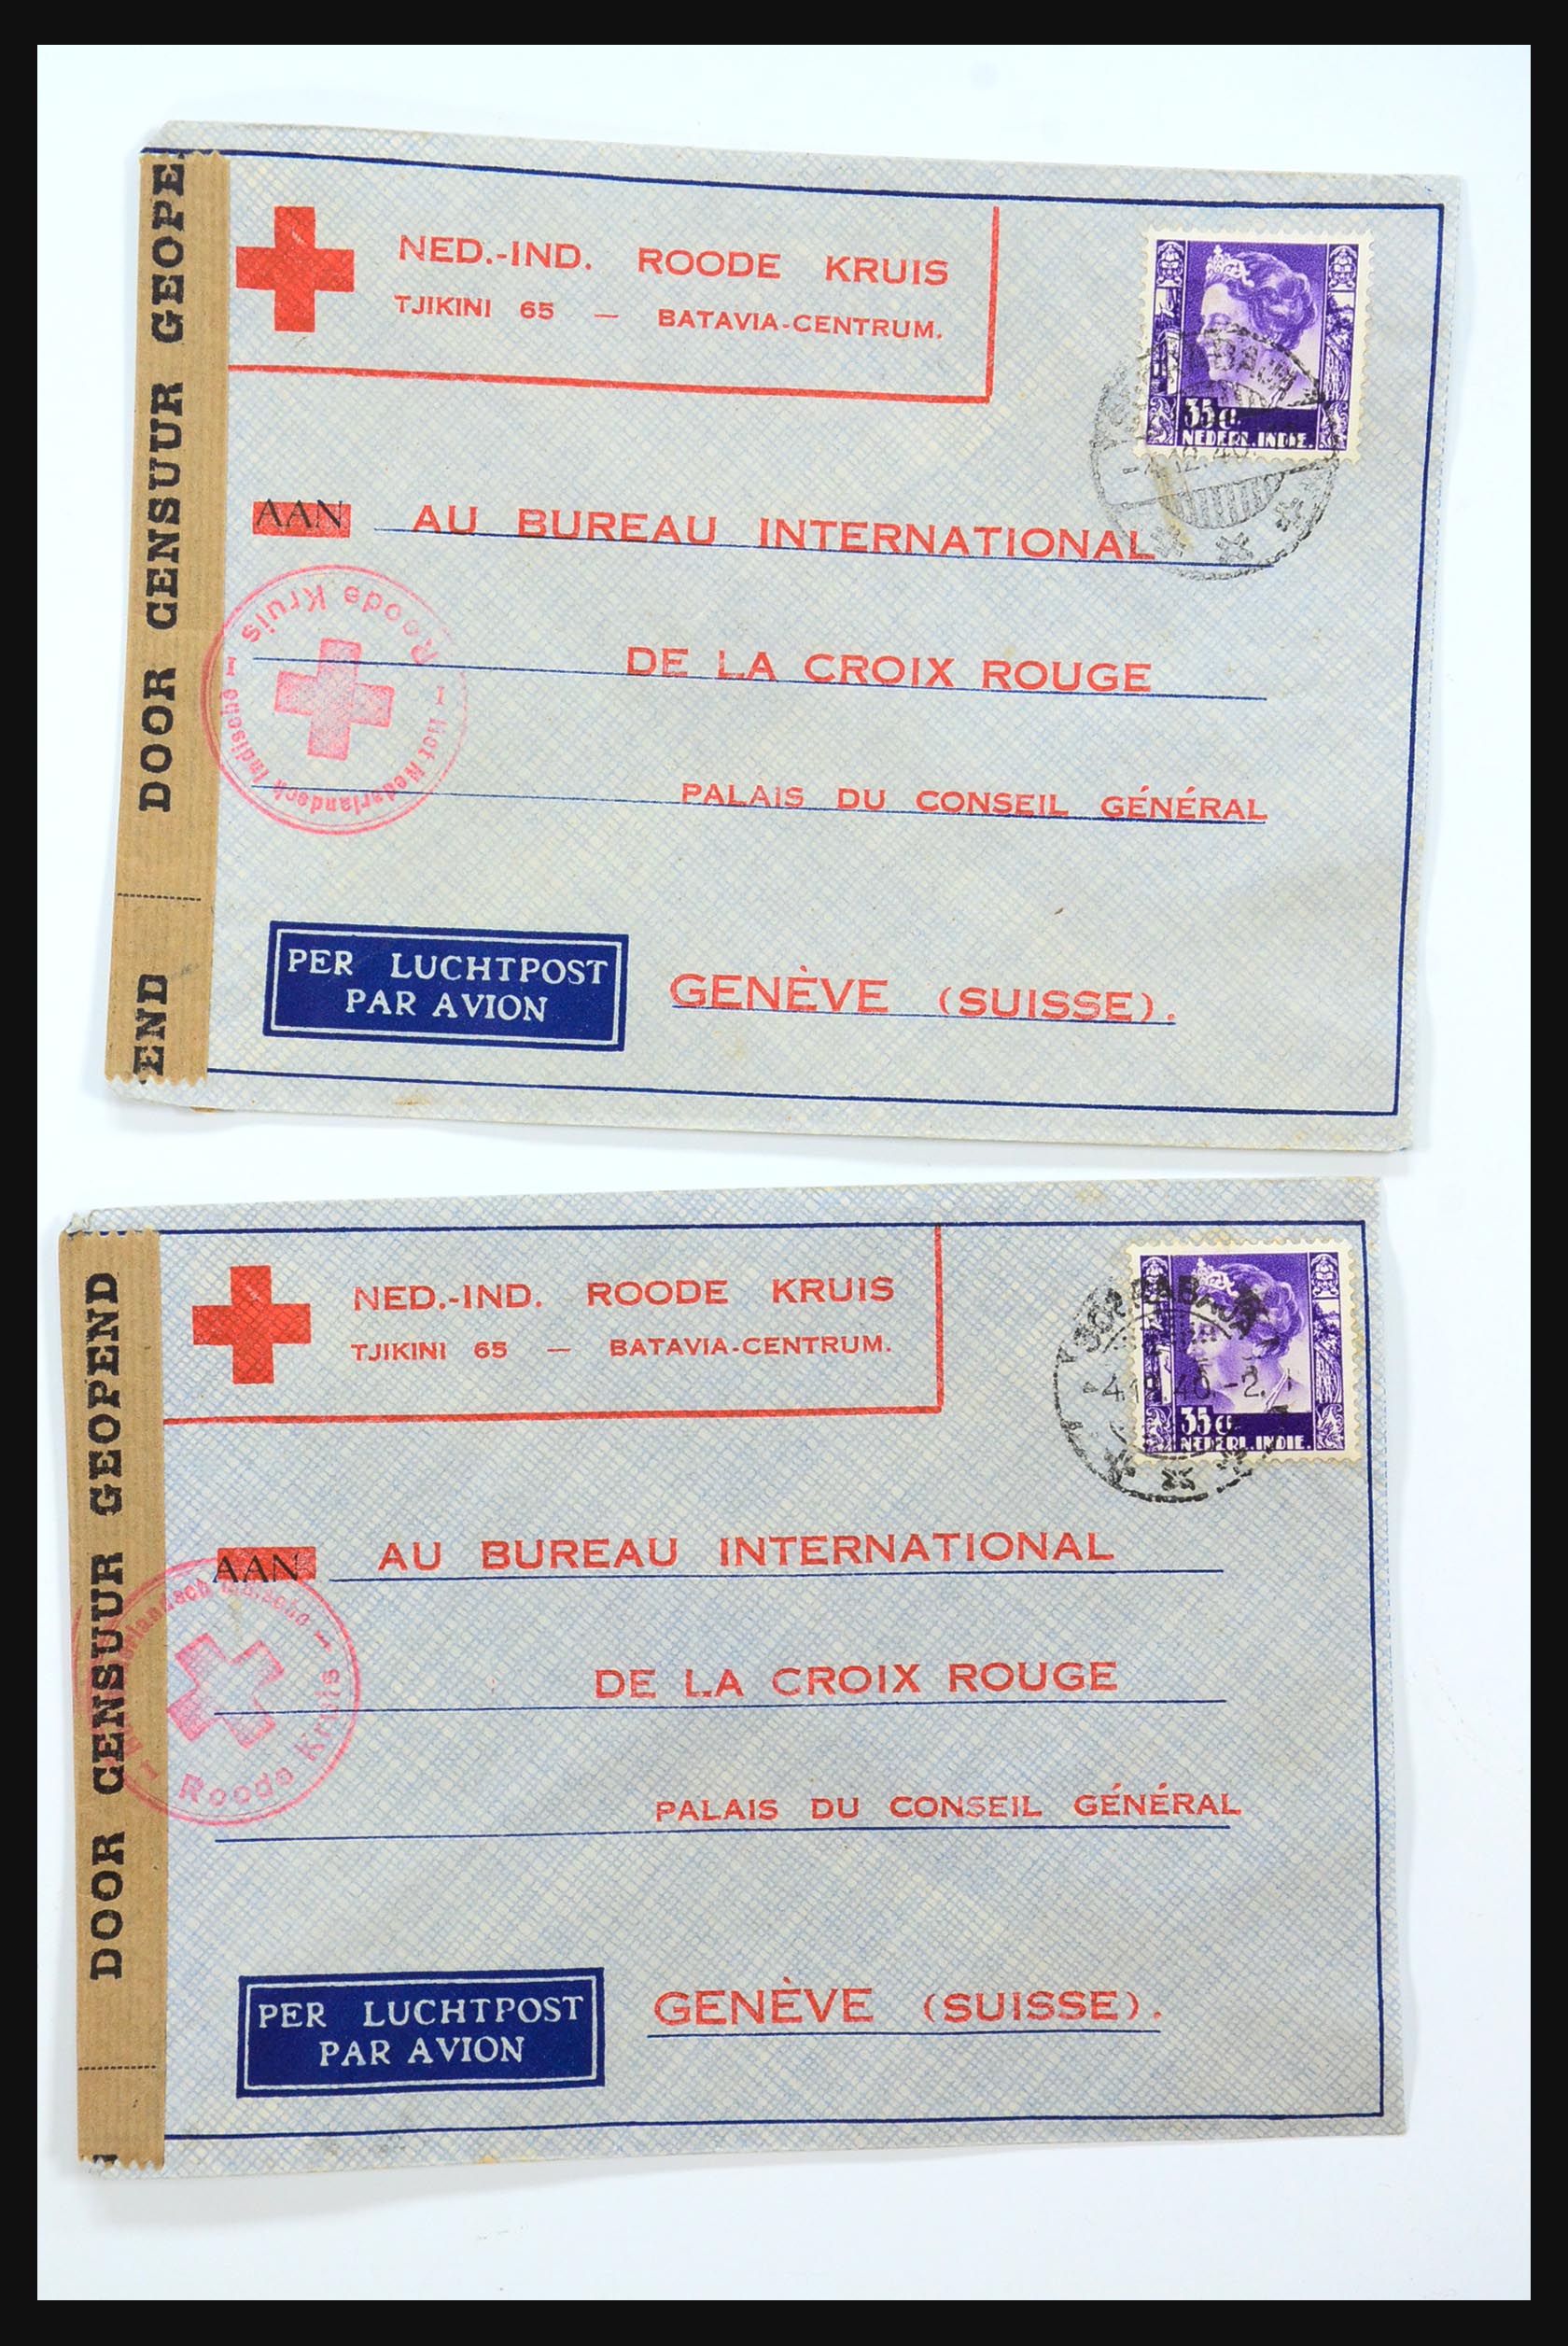 31362 112 - 31362 Netherlands Indies Japanese occupation covers 1942-1945.